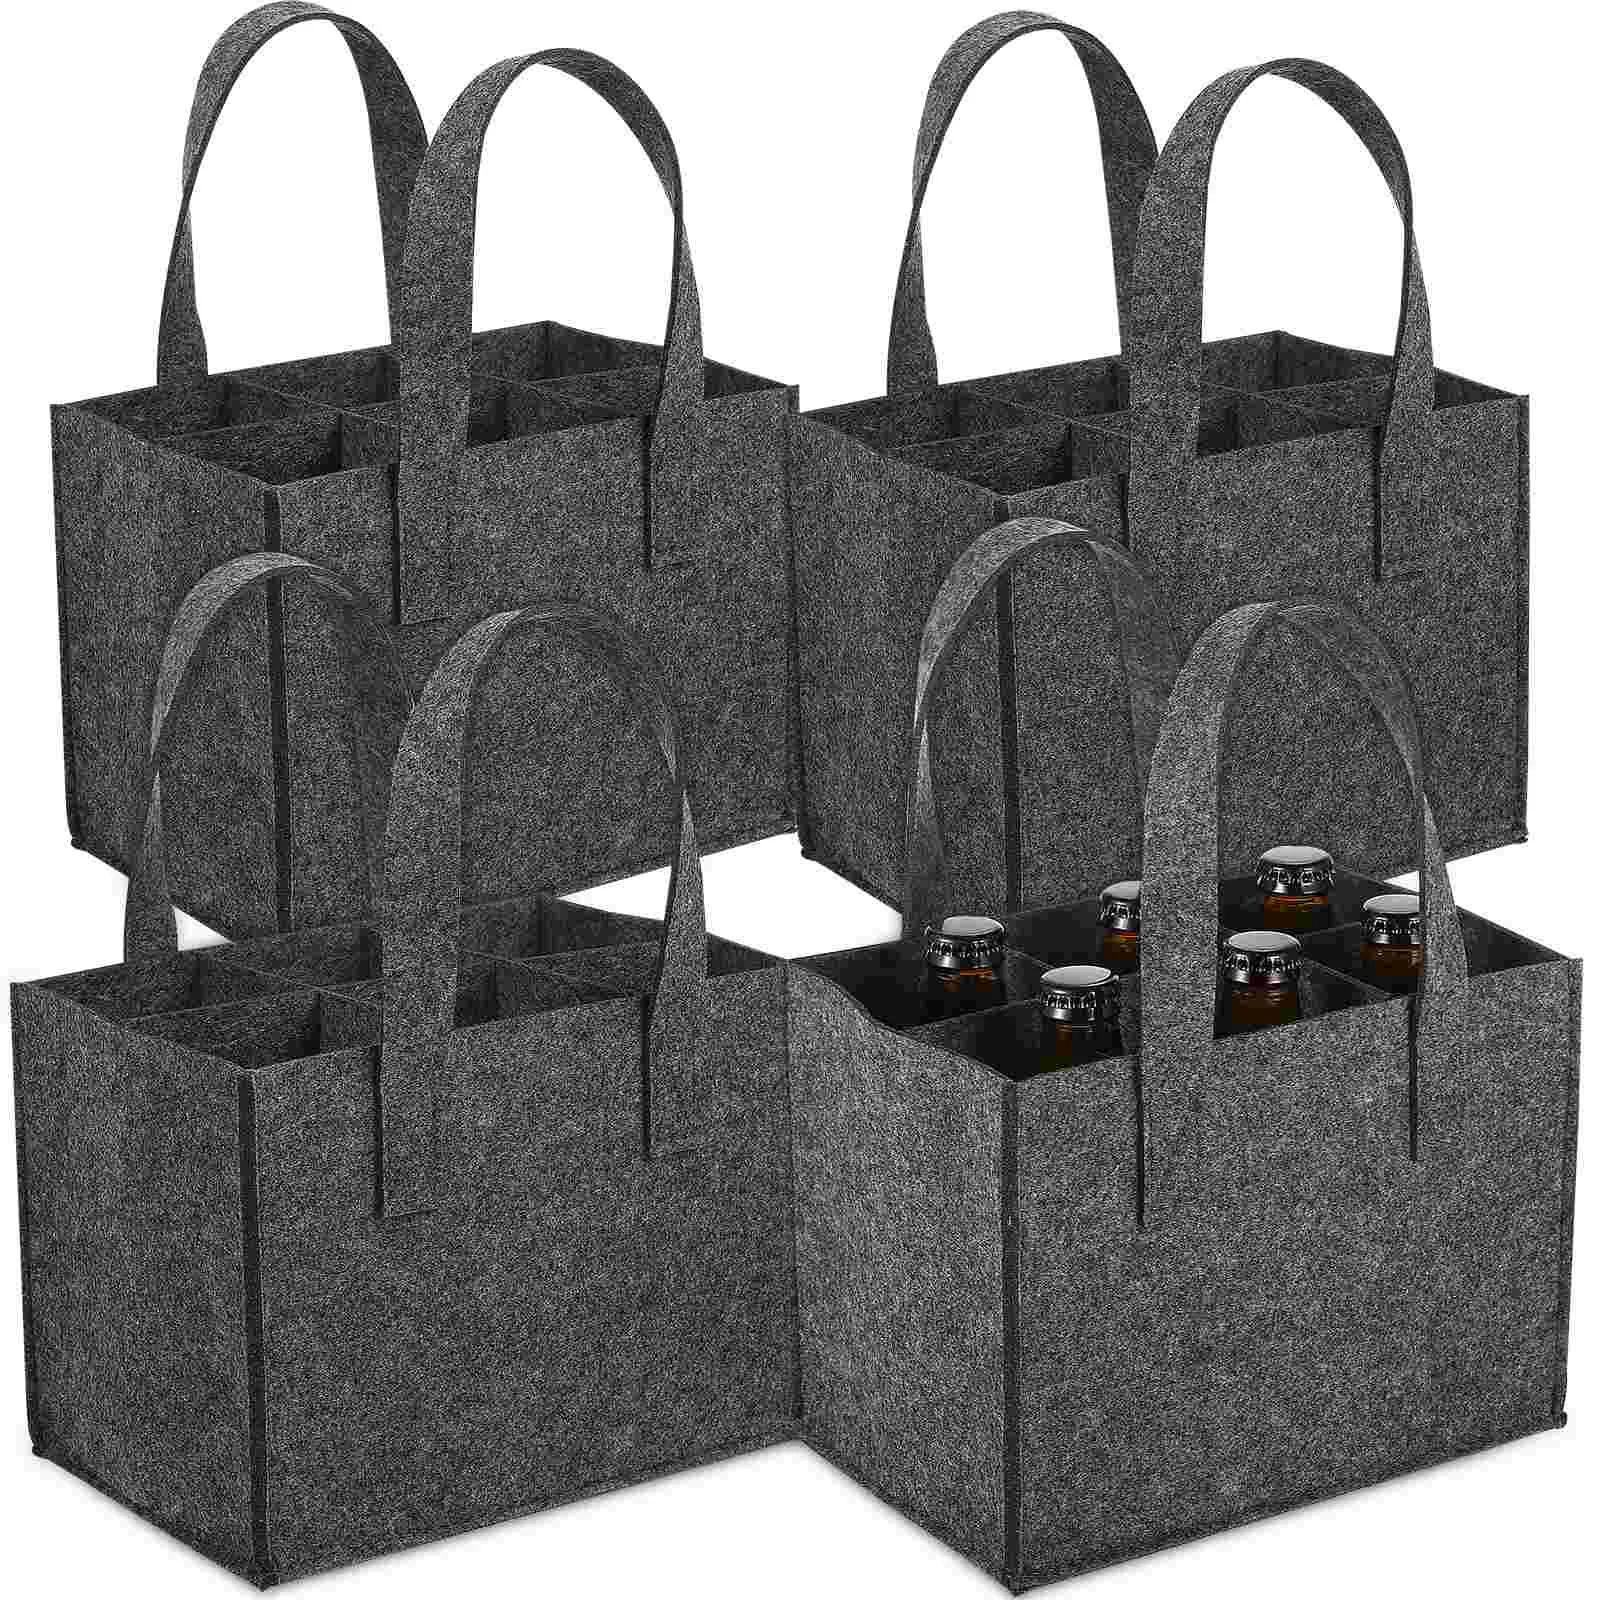 

4 Pcs Tote Bag Bags Gift Wrapping Felt Travel Rack Bottle Carry with Divider